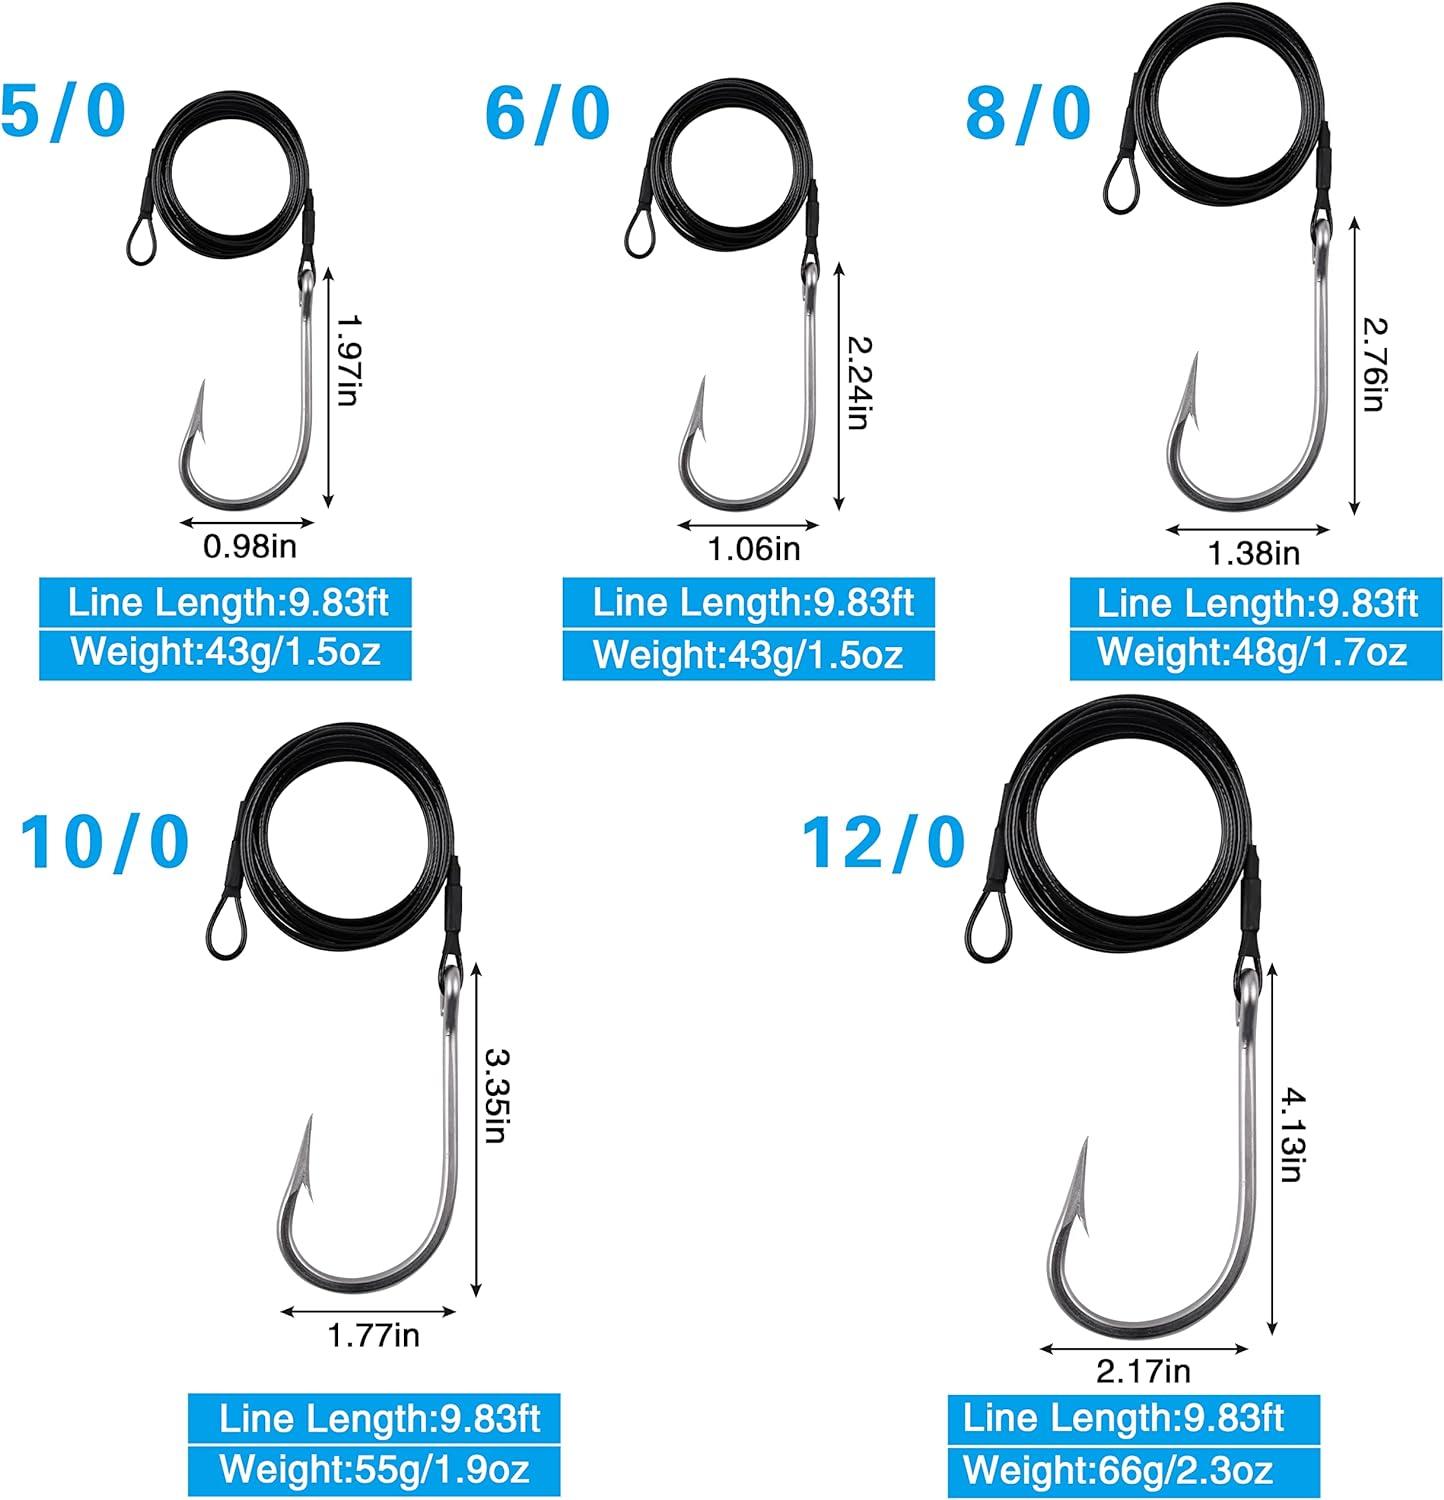 A Guide to Choosing Shark Fishing Wire - Rok Max